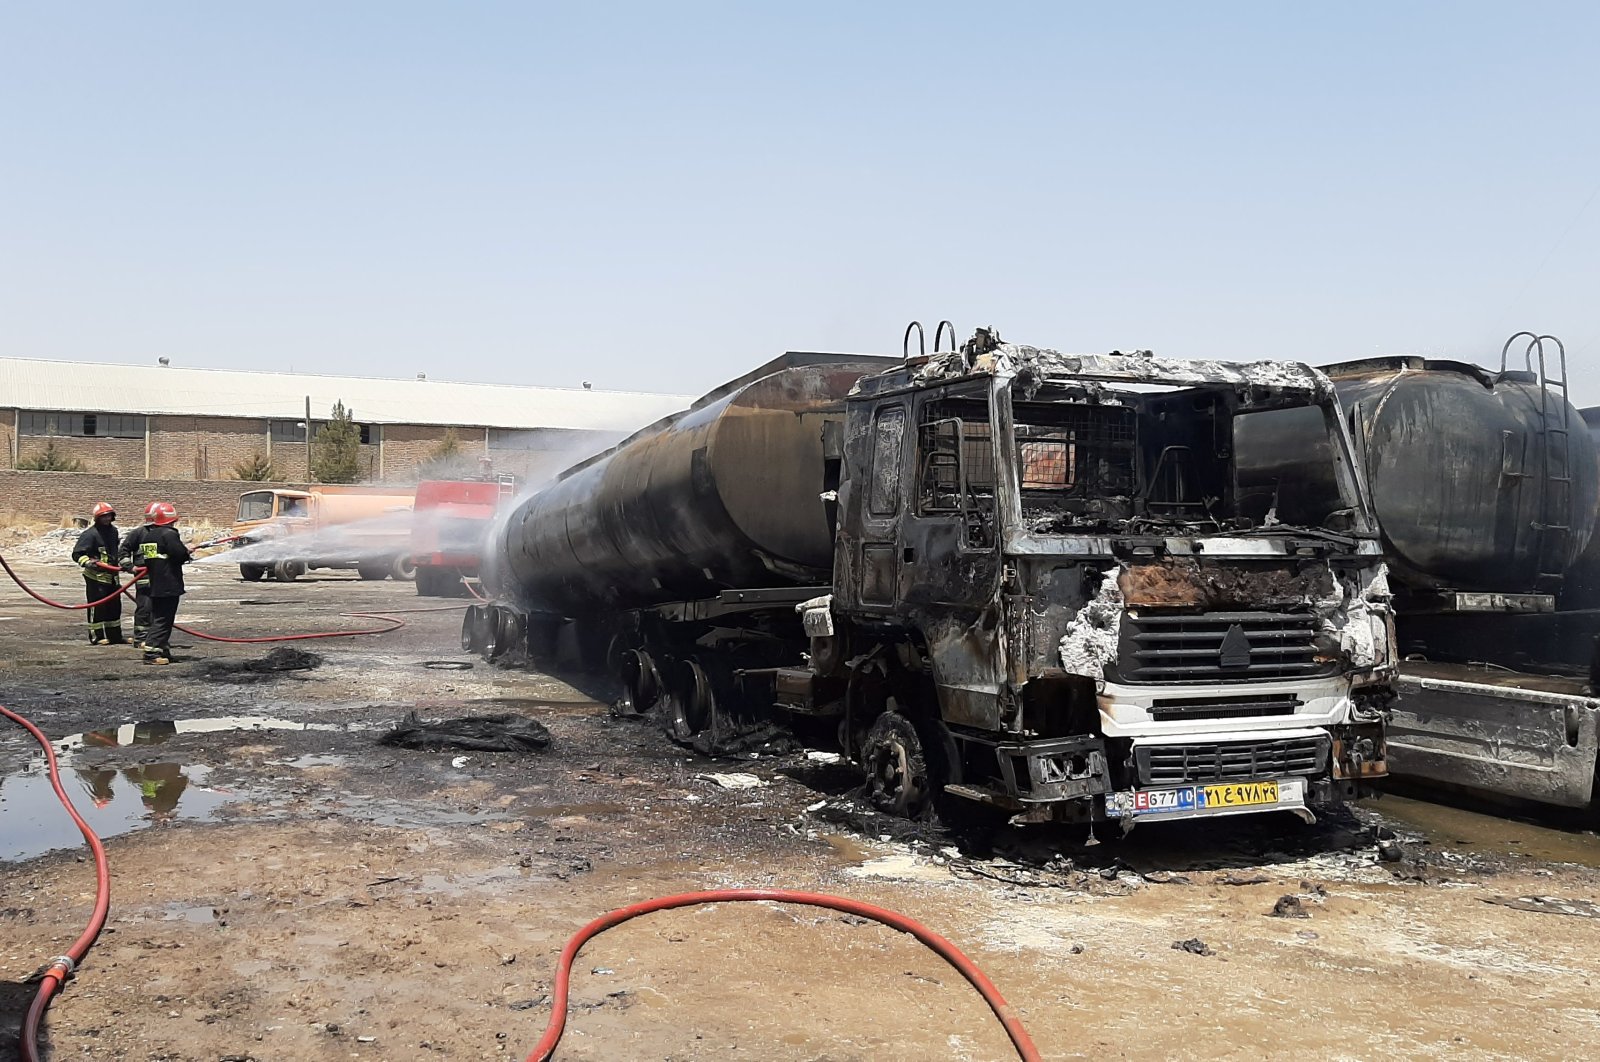 Firefighters put out the fire on fuel tanks after they were hit by an explosion in Kermanshah province, Iran July 28, 2020. (WANA Photo via Reuters) 